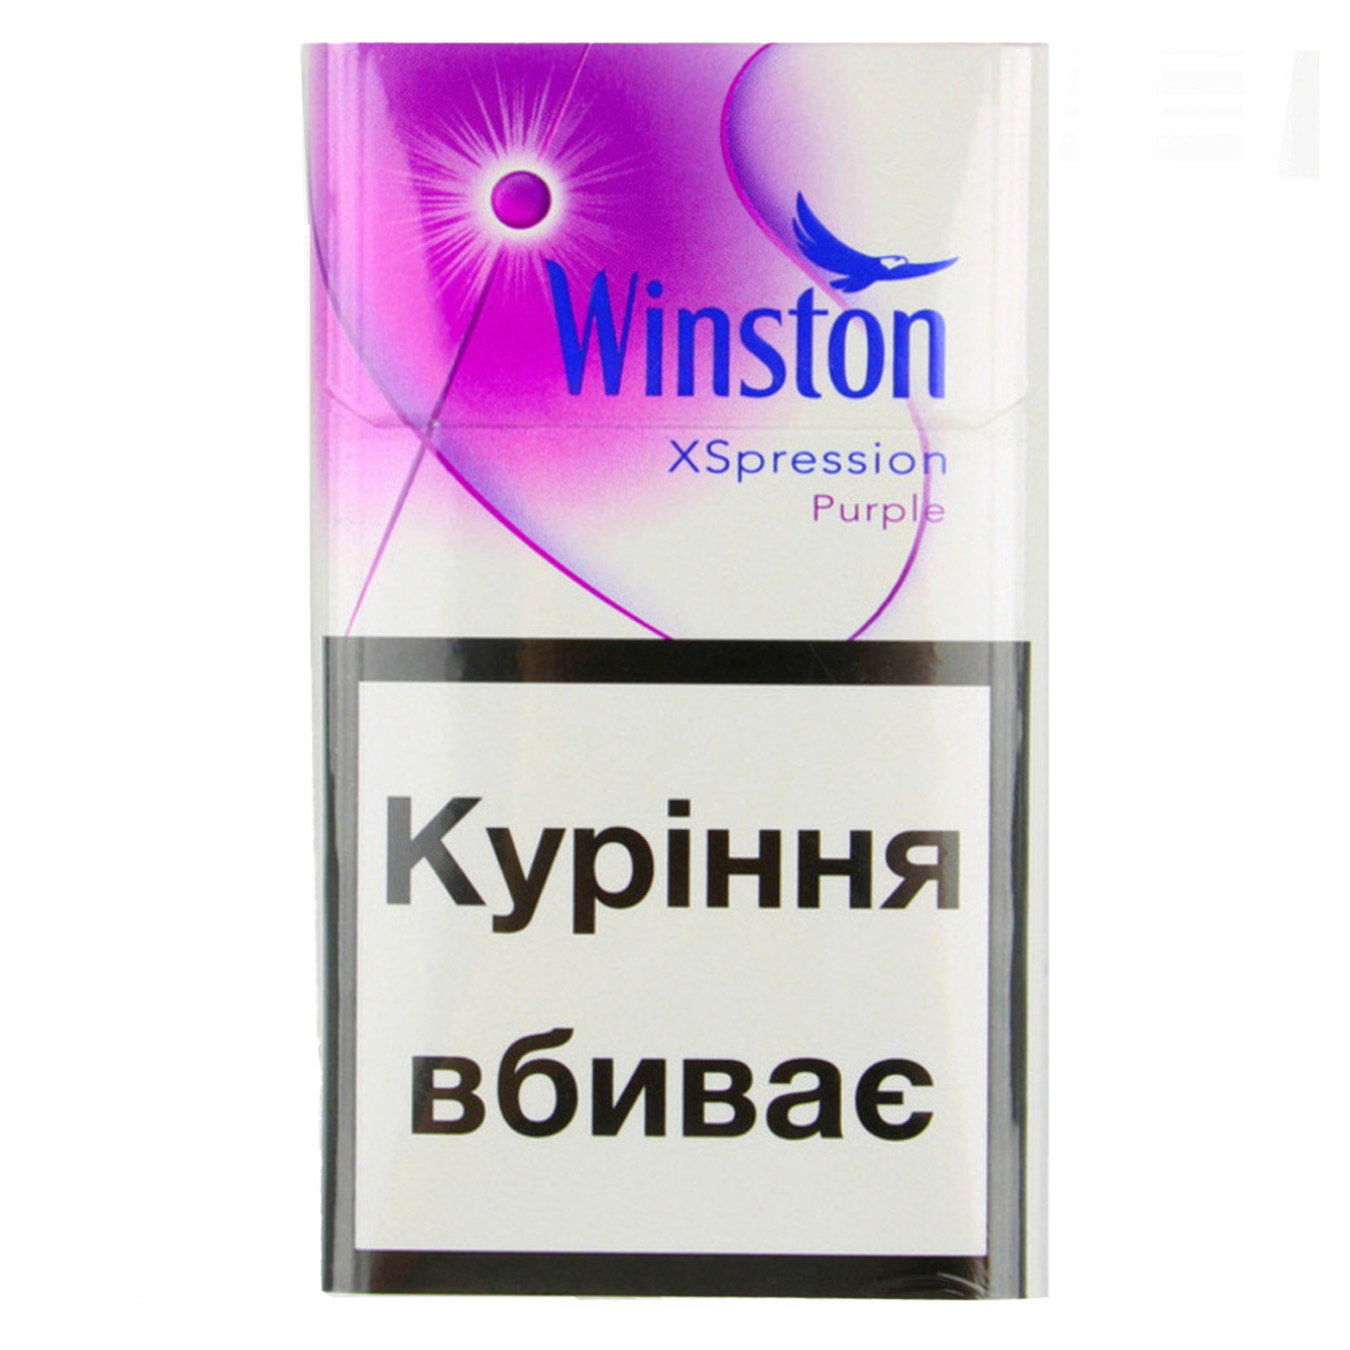 Winston XSpression Purple Cigarettes 20 pcs (the price is indicated without excise tax)